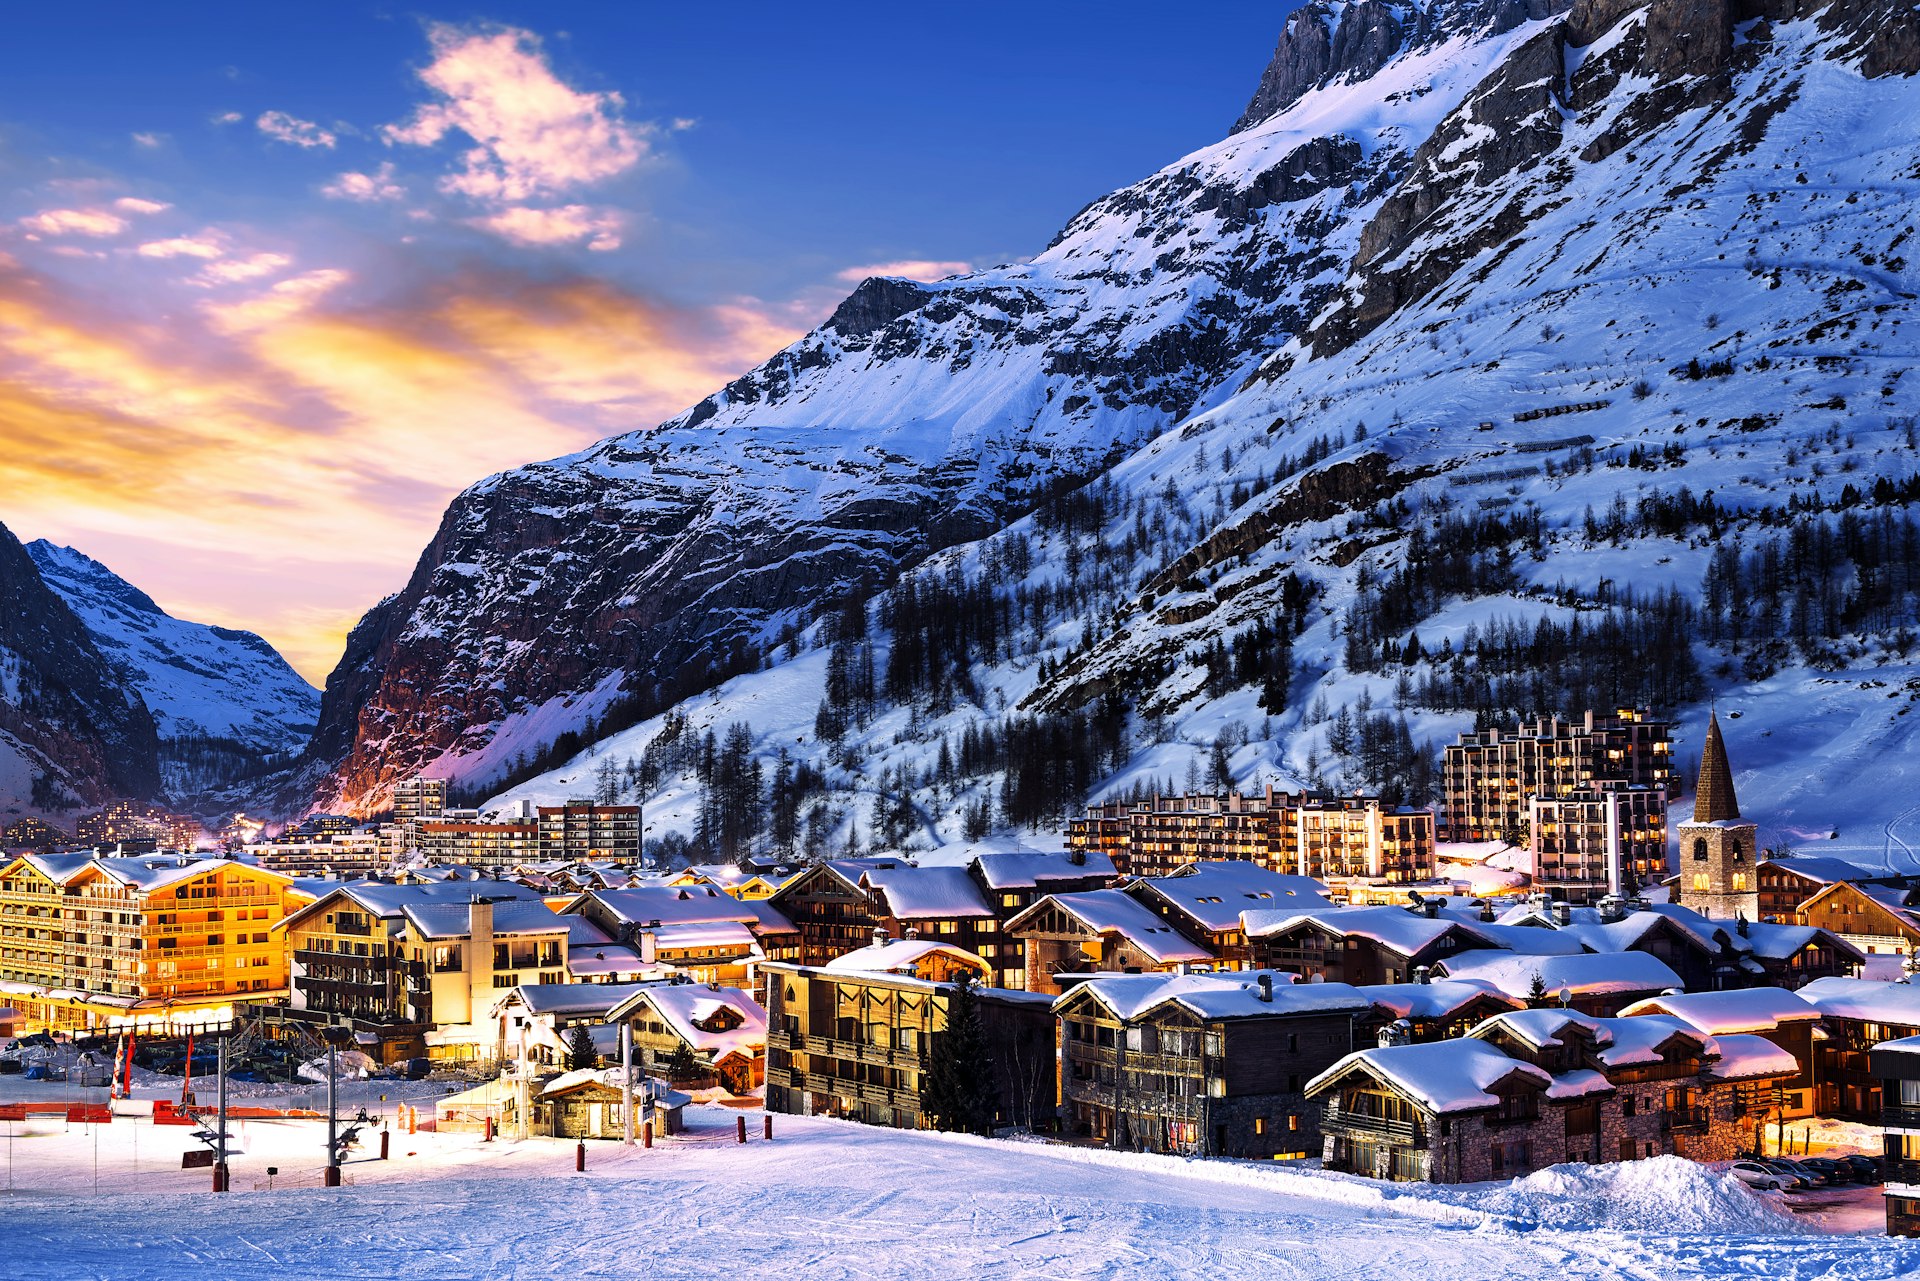 The town center of Val-d'Isere at dawn, with snow-covered roofs on ski lodges and chalets